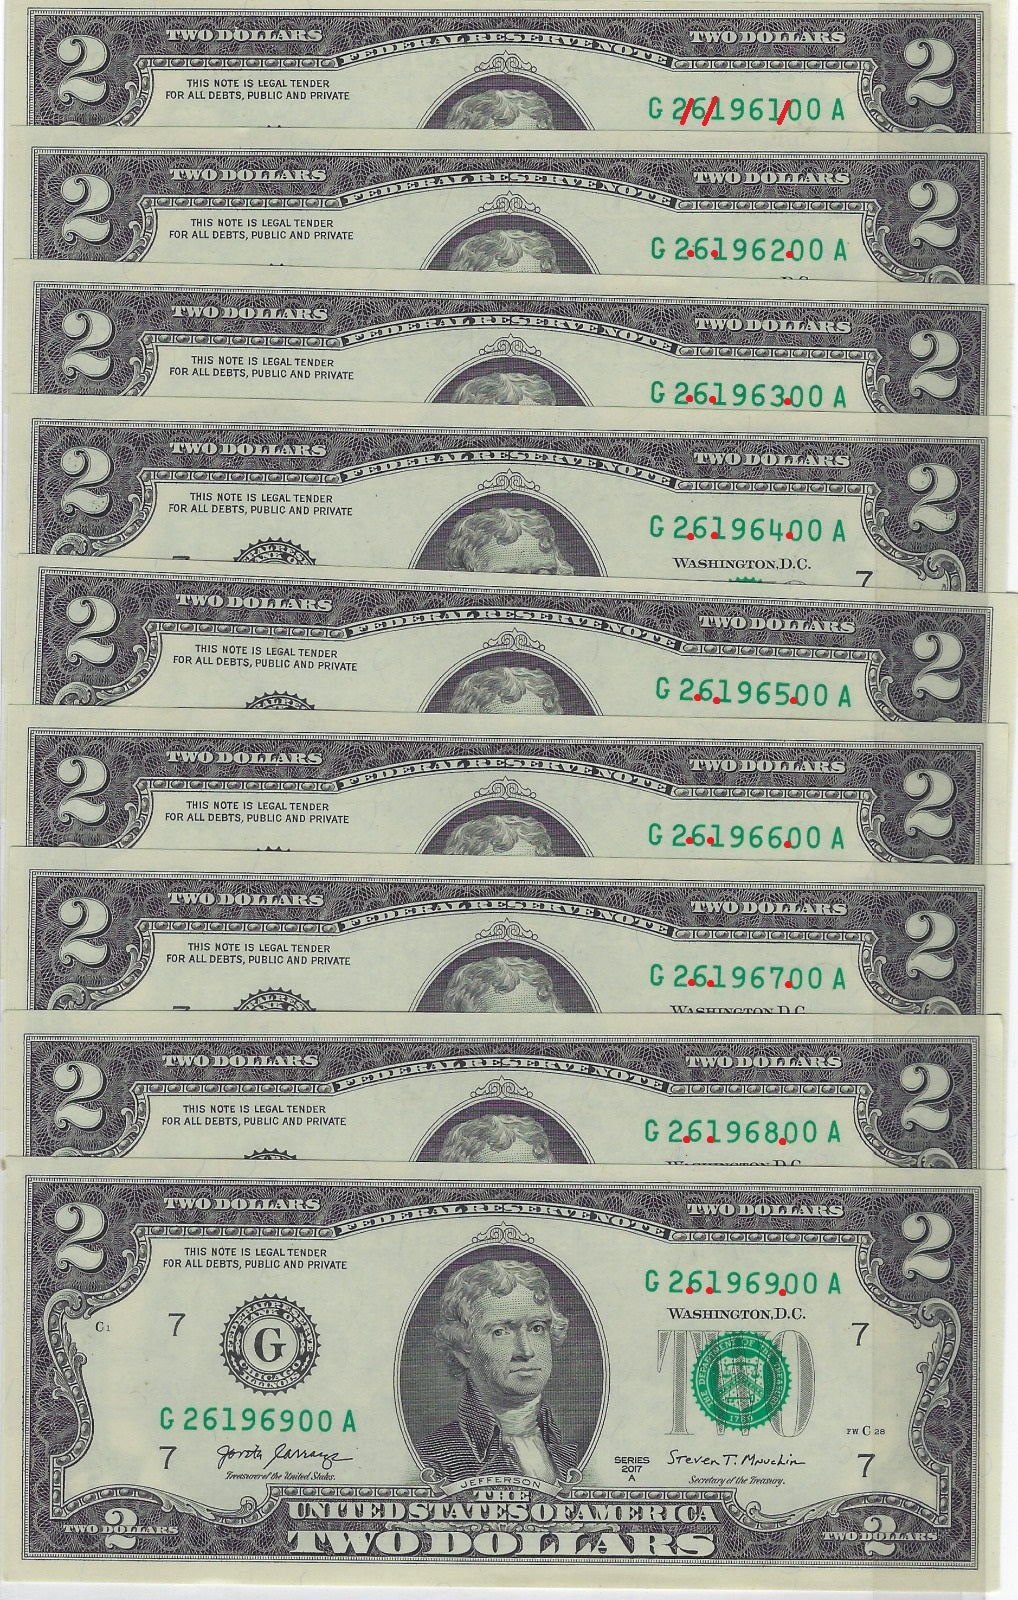 US$2 x9 FRN Chicago 7G Fancy SN Consecutive ROUND & Dates 2 6 1961 ,2,3 up to 69 UNC.FNB3